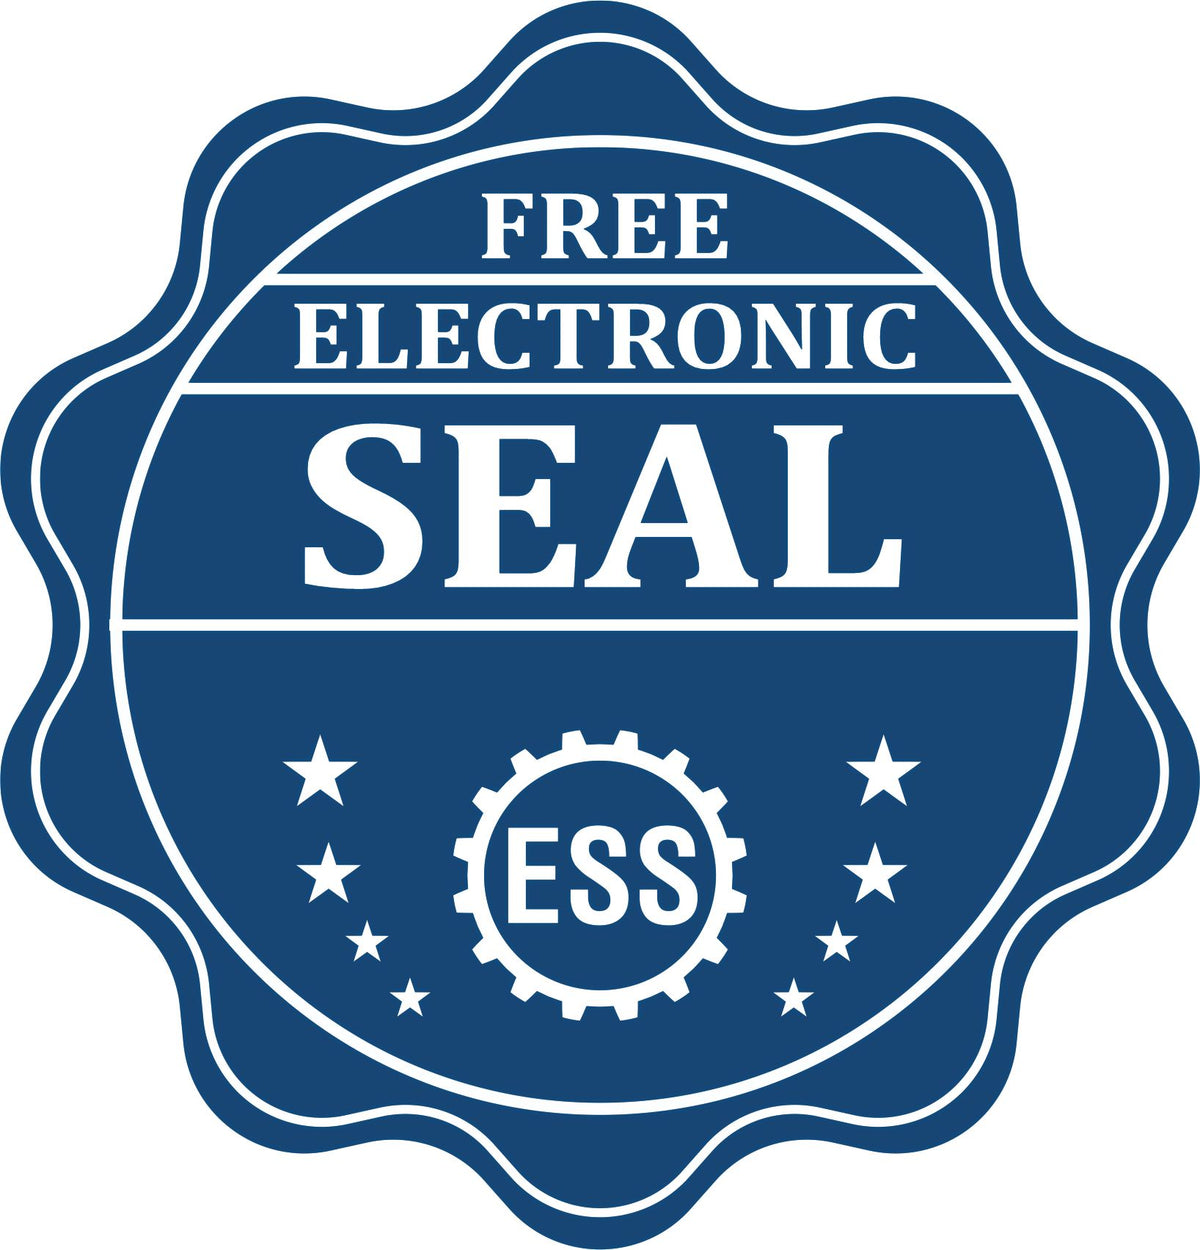 A badge showing a free electronic seal for the Slim Pre-Inked Rhode Island Professional Geologist Seal Stamp with stars and the ESS gear on the emblem.